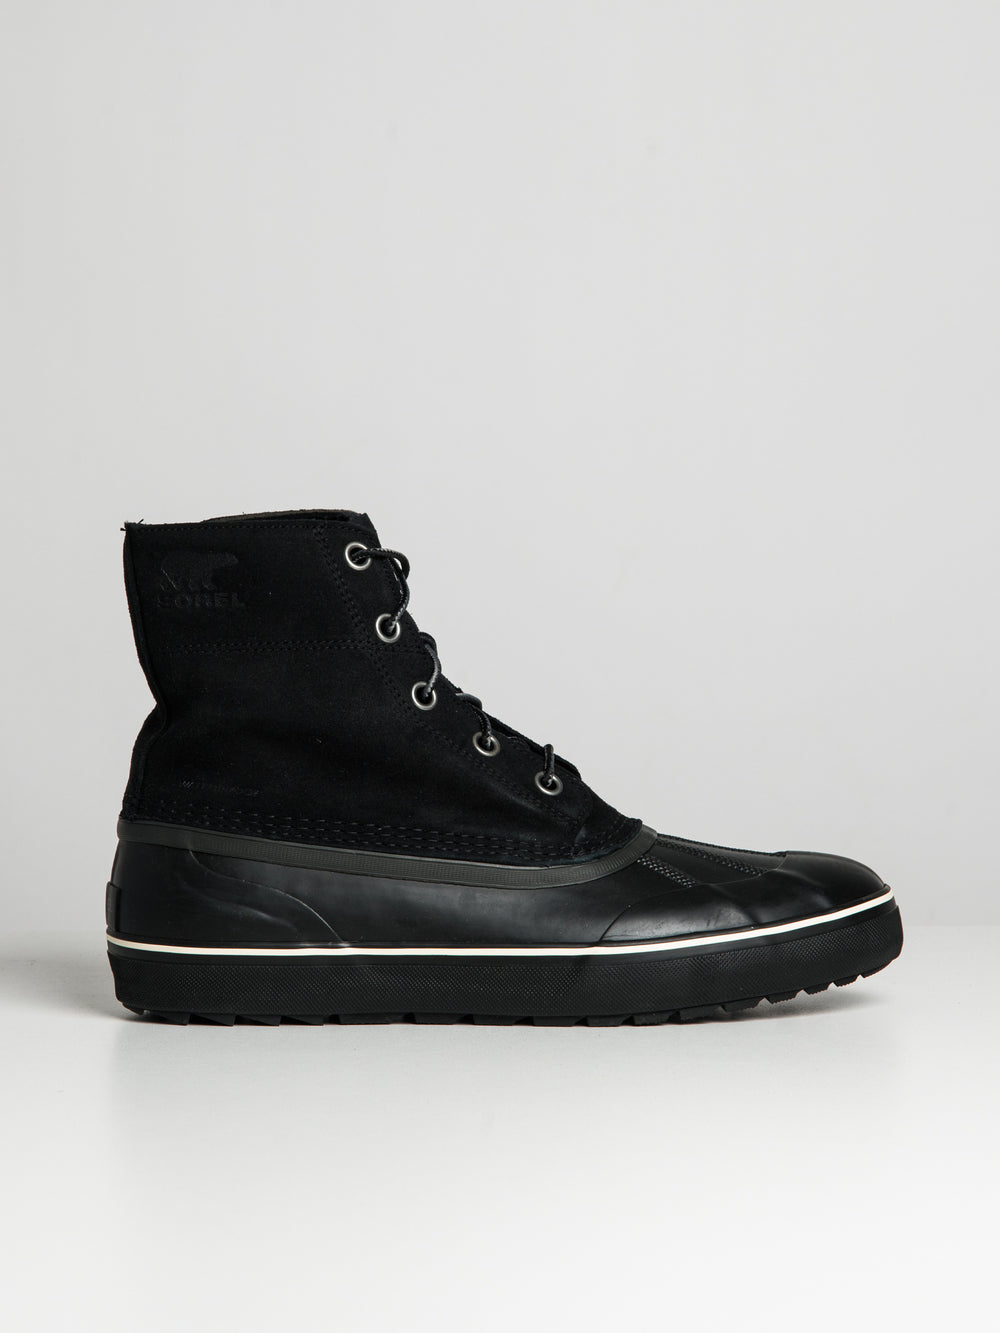 MENS CHEYANNE METRO LACE WP - BLK - CLEARANCE